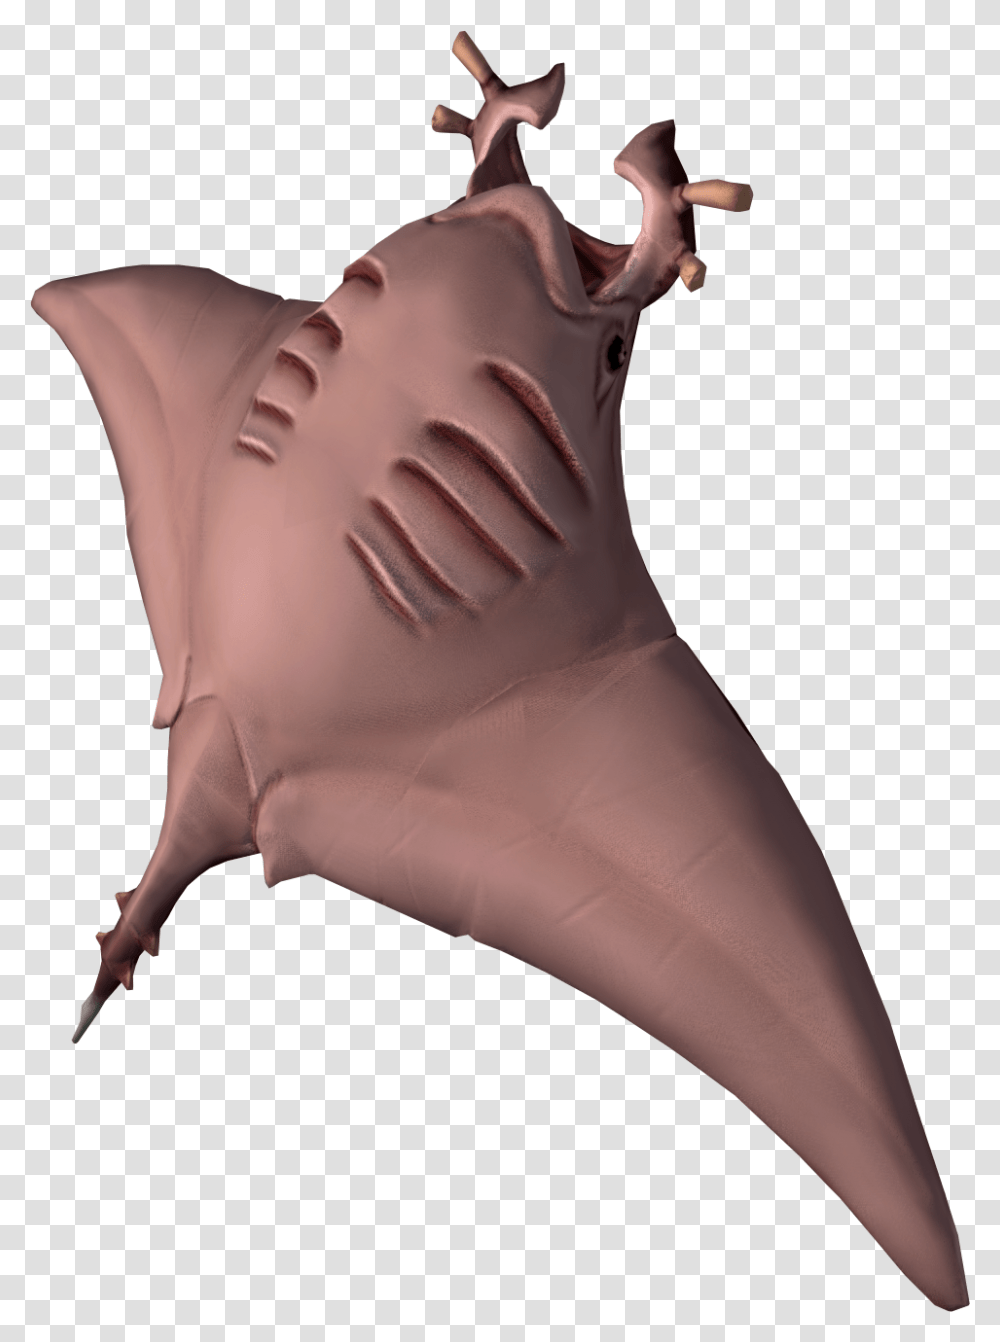 Manta Rays Are A Members Only Fish That Require A Cooking Cooked Manta Ray, Person, Human, Animal, Sea Life Transparent Png